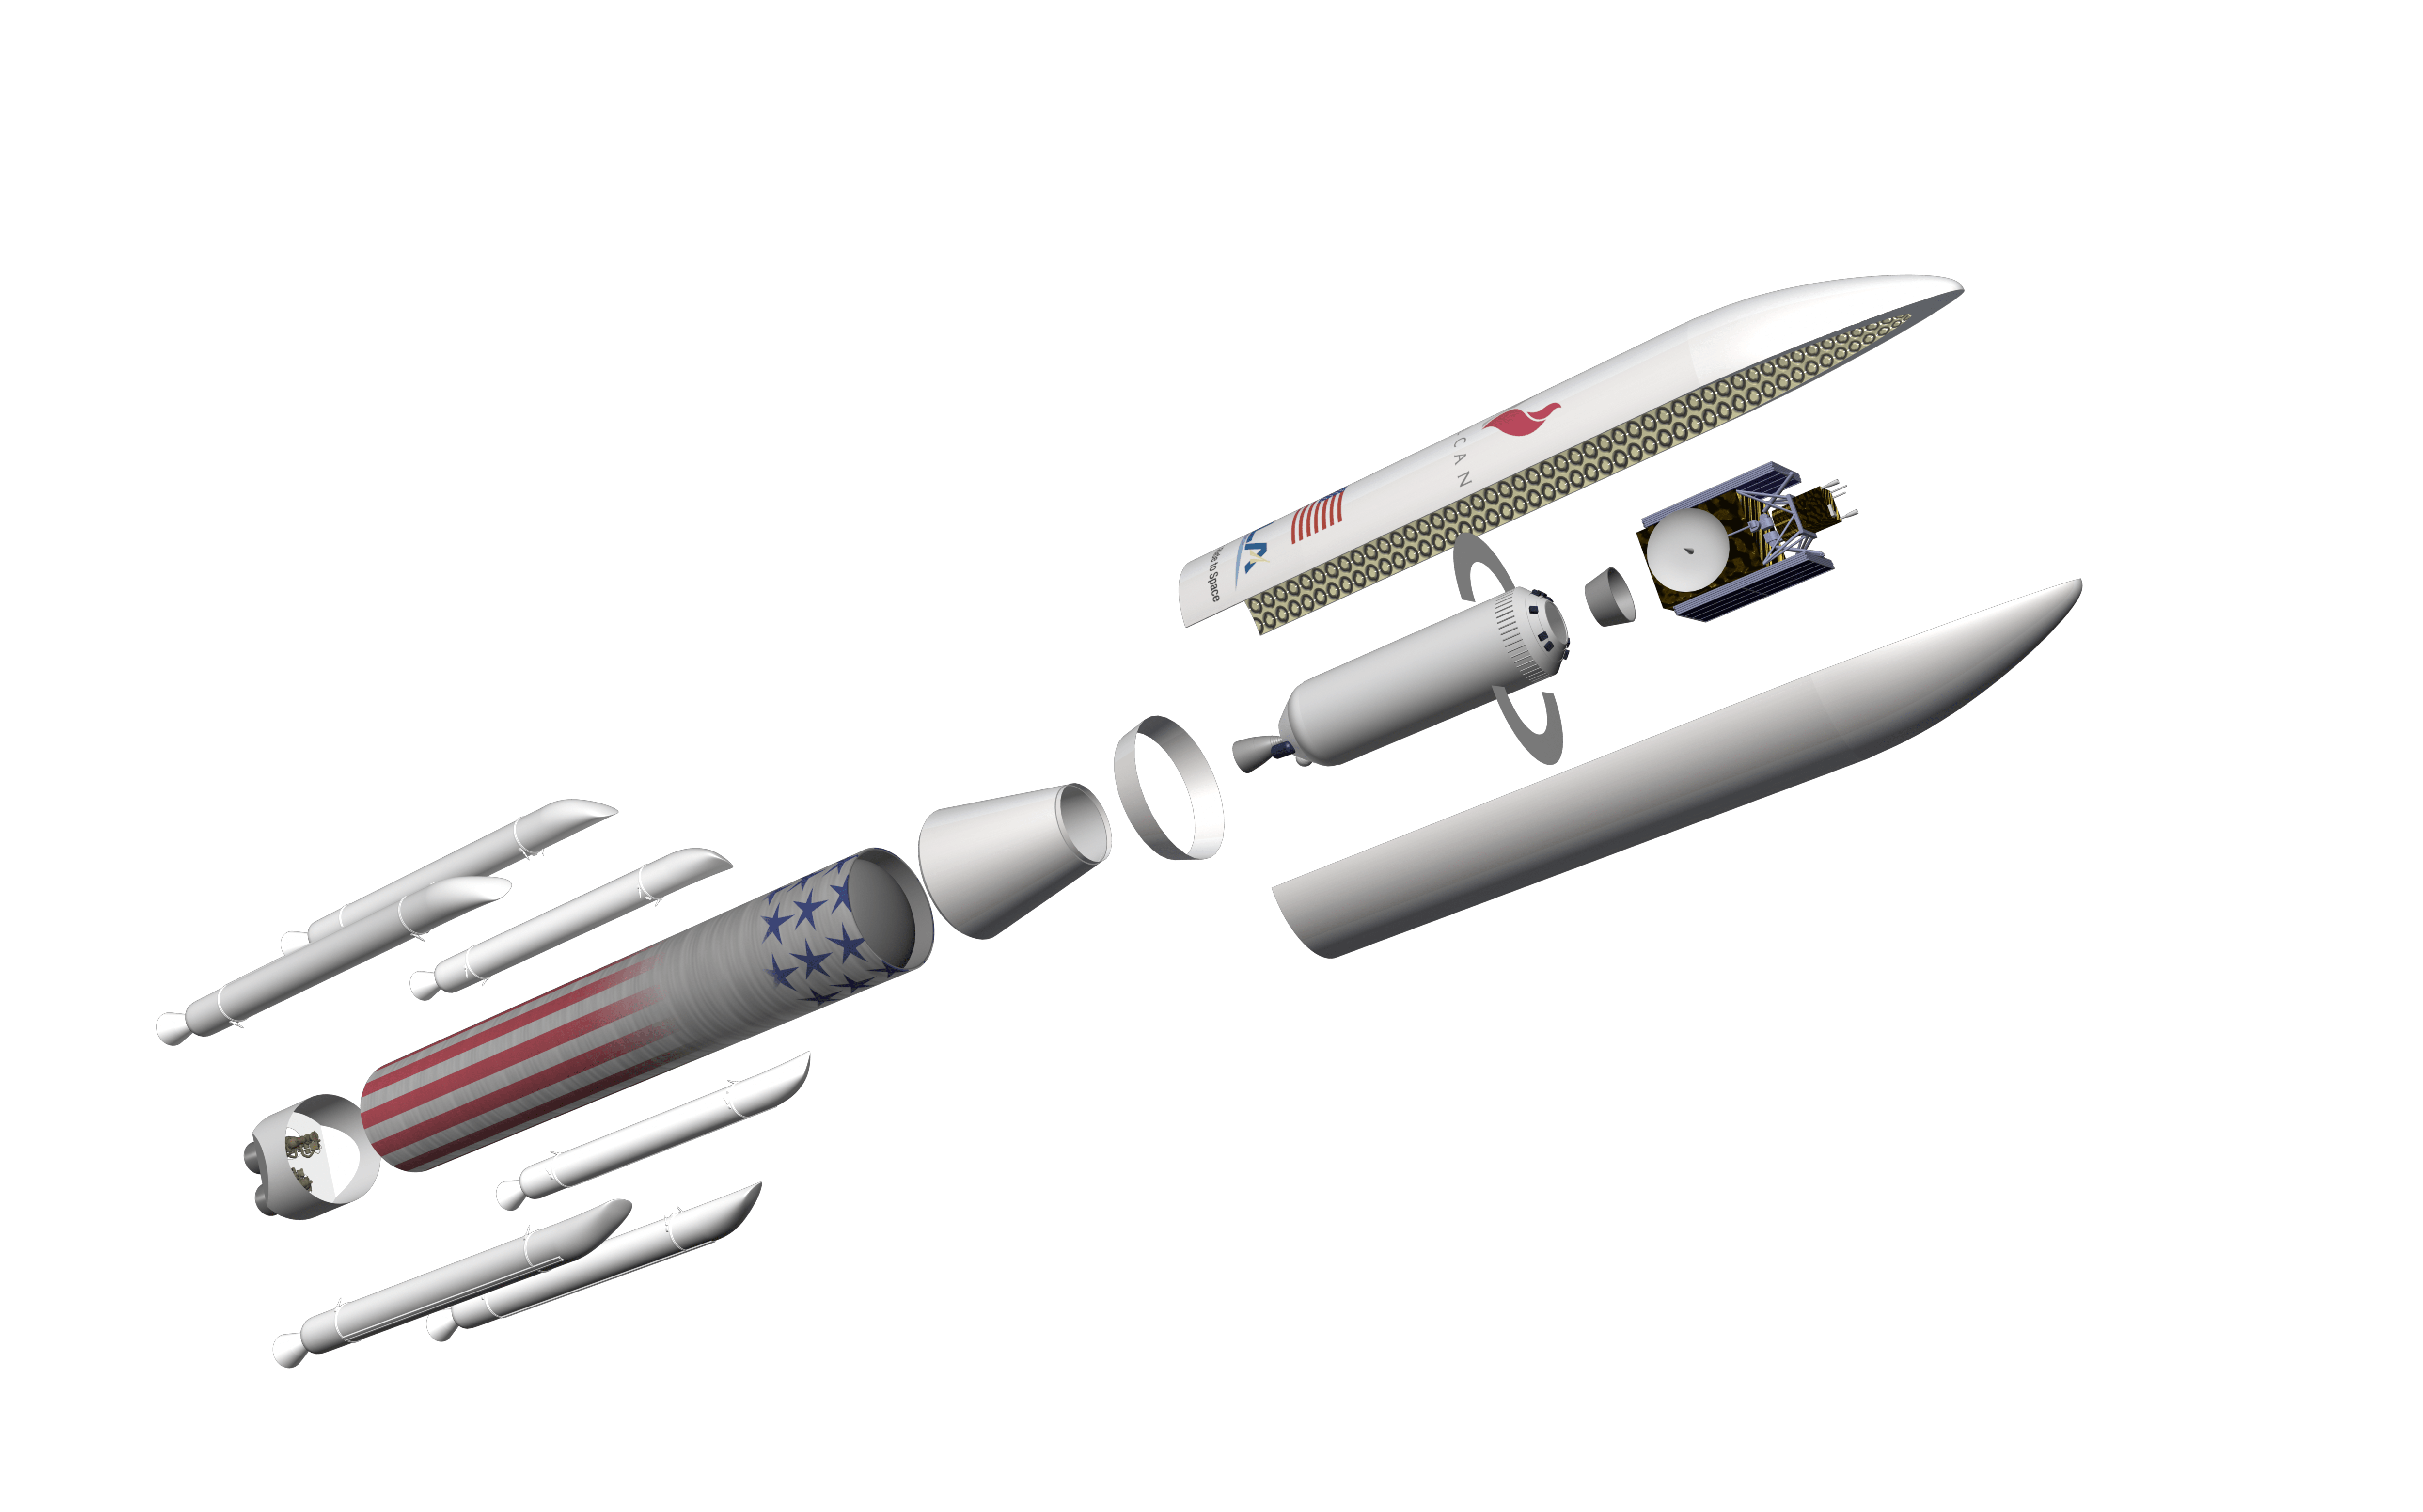 Cutaway diagram of ULA’s new Vulcan rocket powered by BE-4 first stage engines, six solid rocket motors and a 5 meter diameter payload fairing. Credit ULA